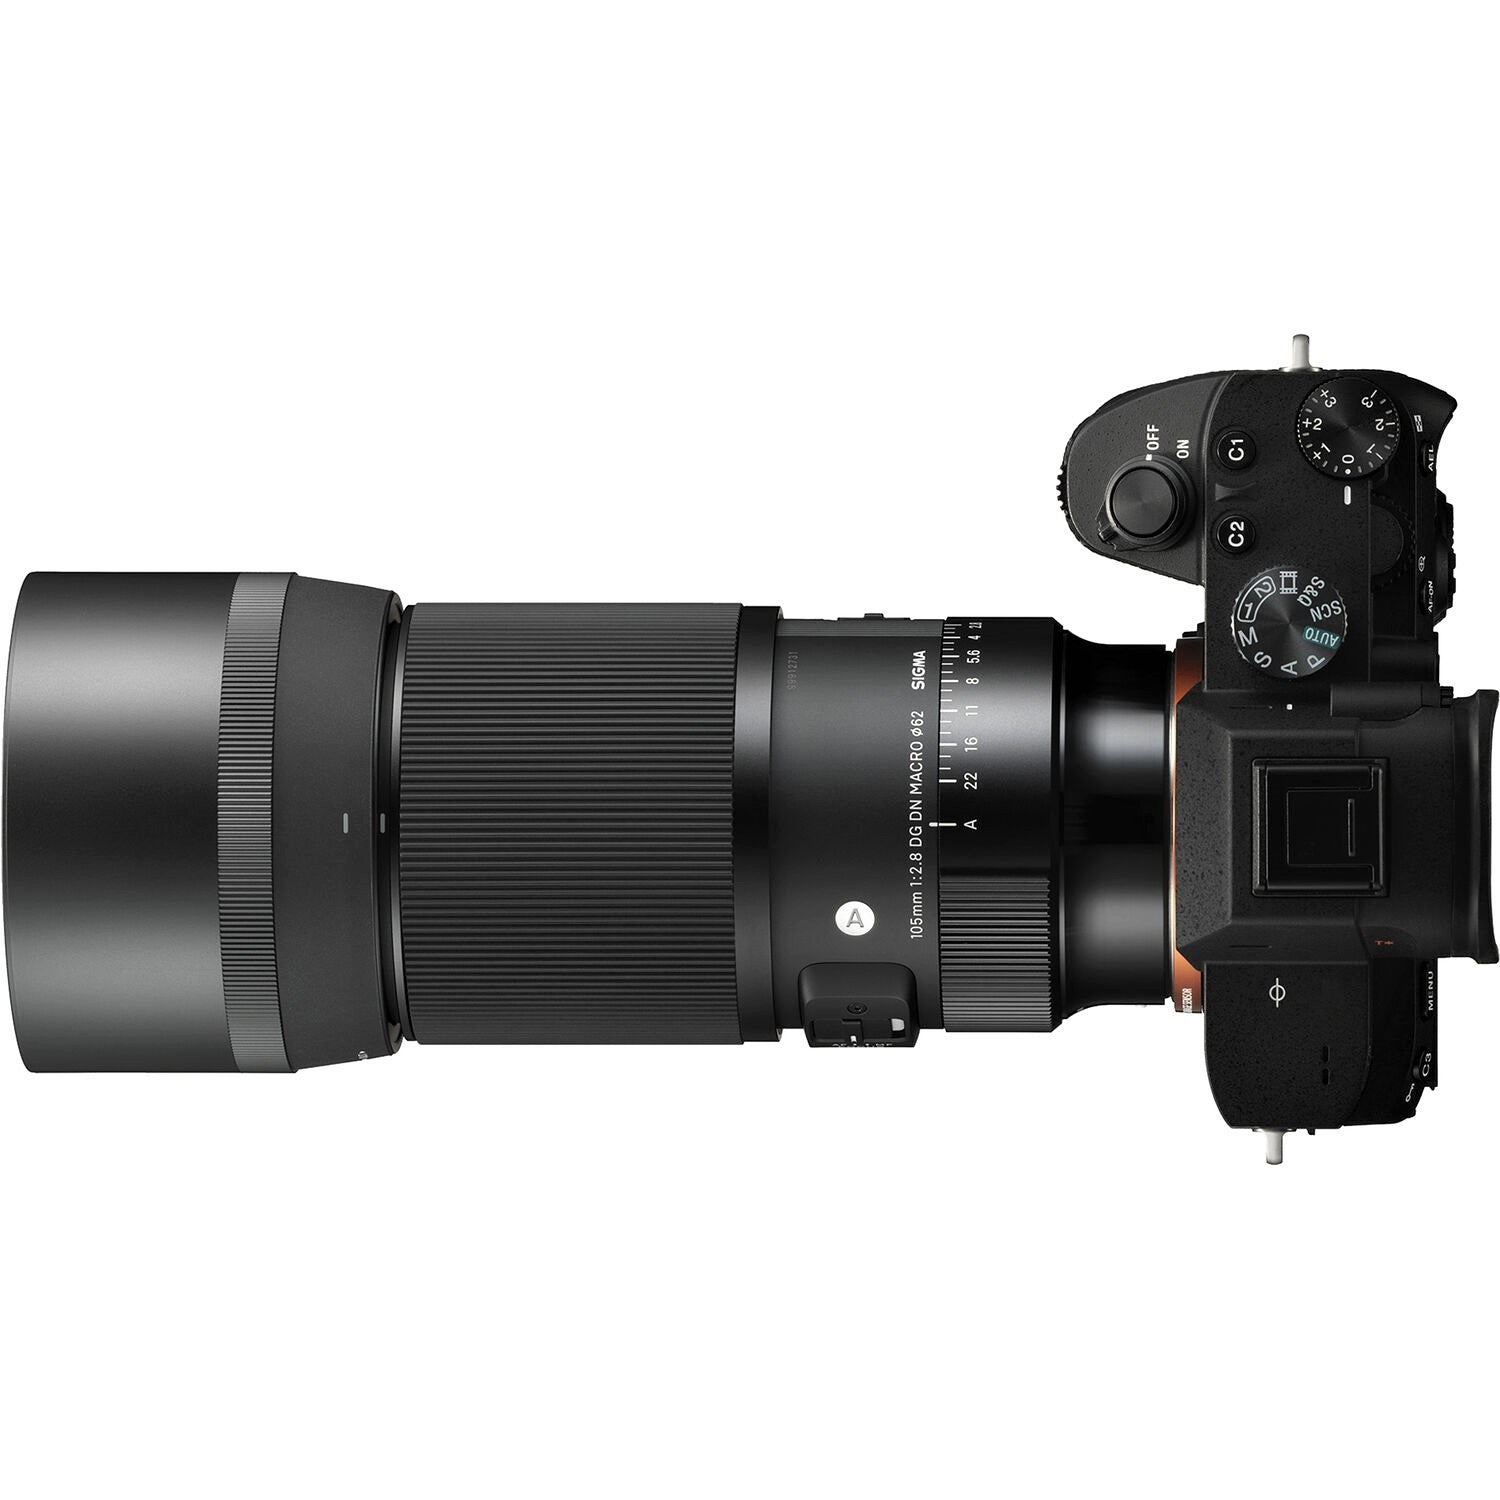 Sigma 105mm F2.8 DG DN Macro Art Lens for Sony E with Attached Camera on the Right Side